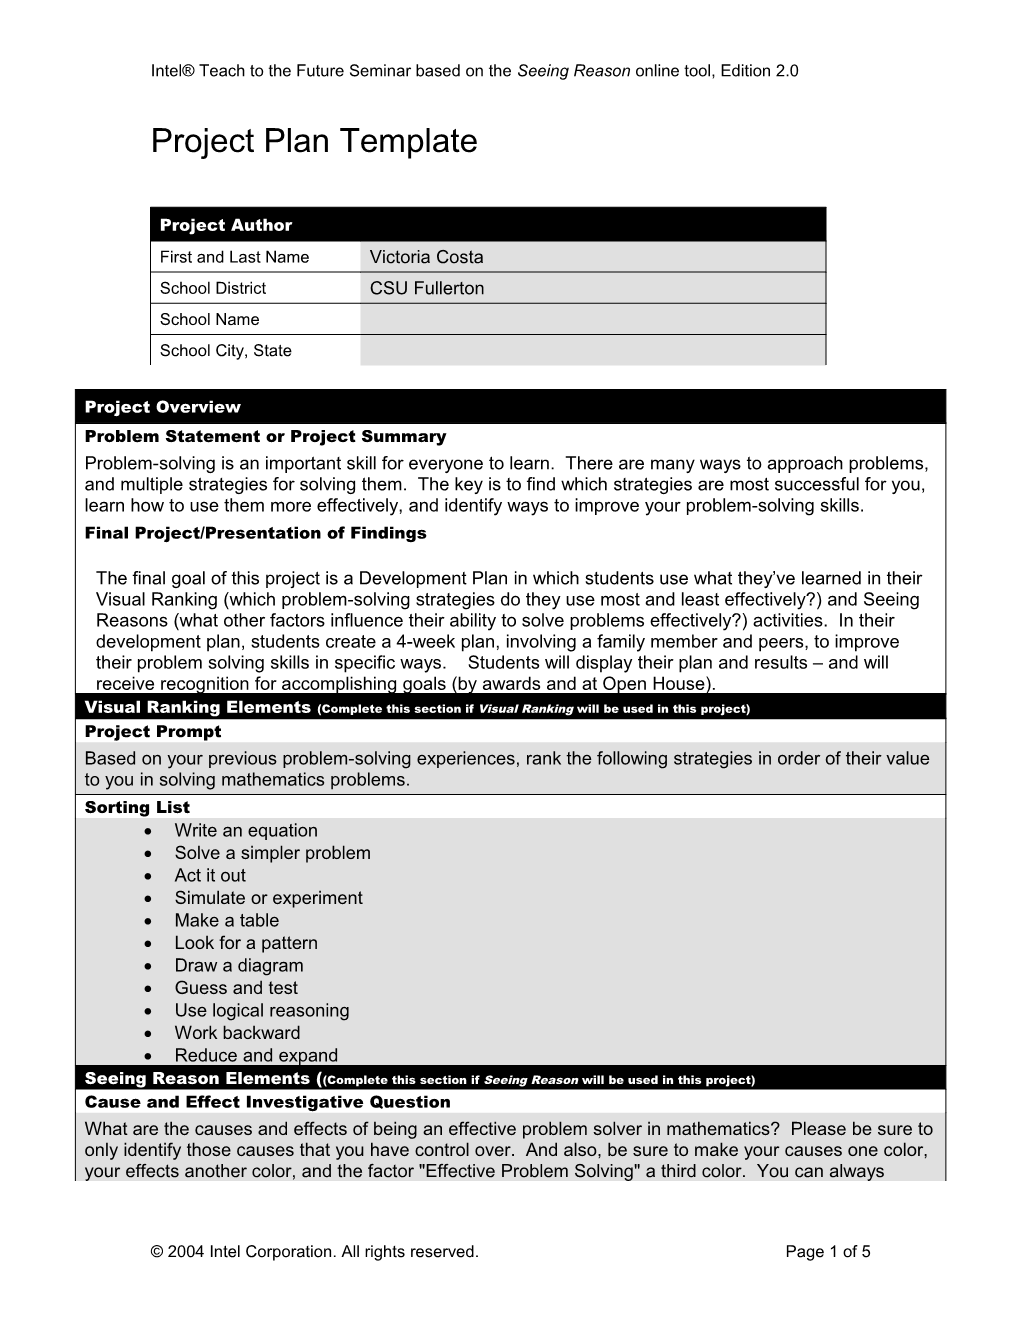 Lesson Plan Template s45